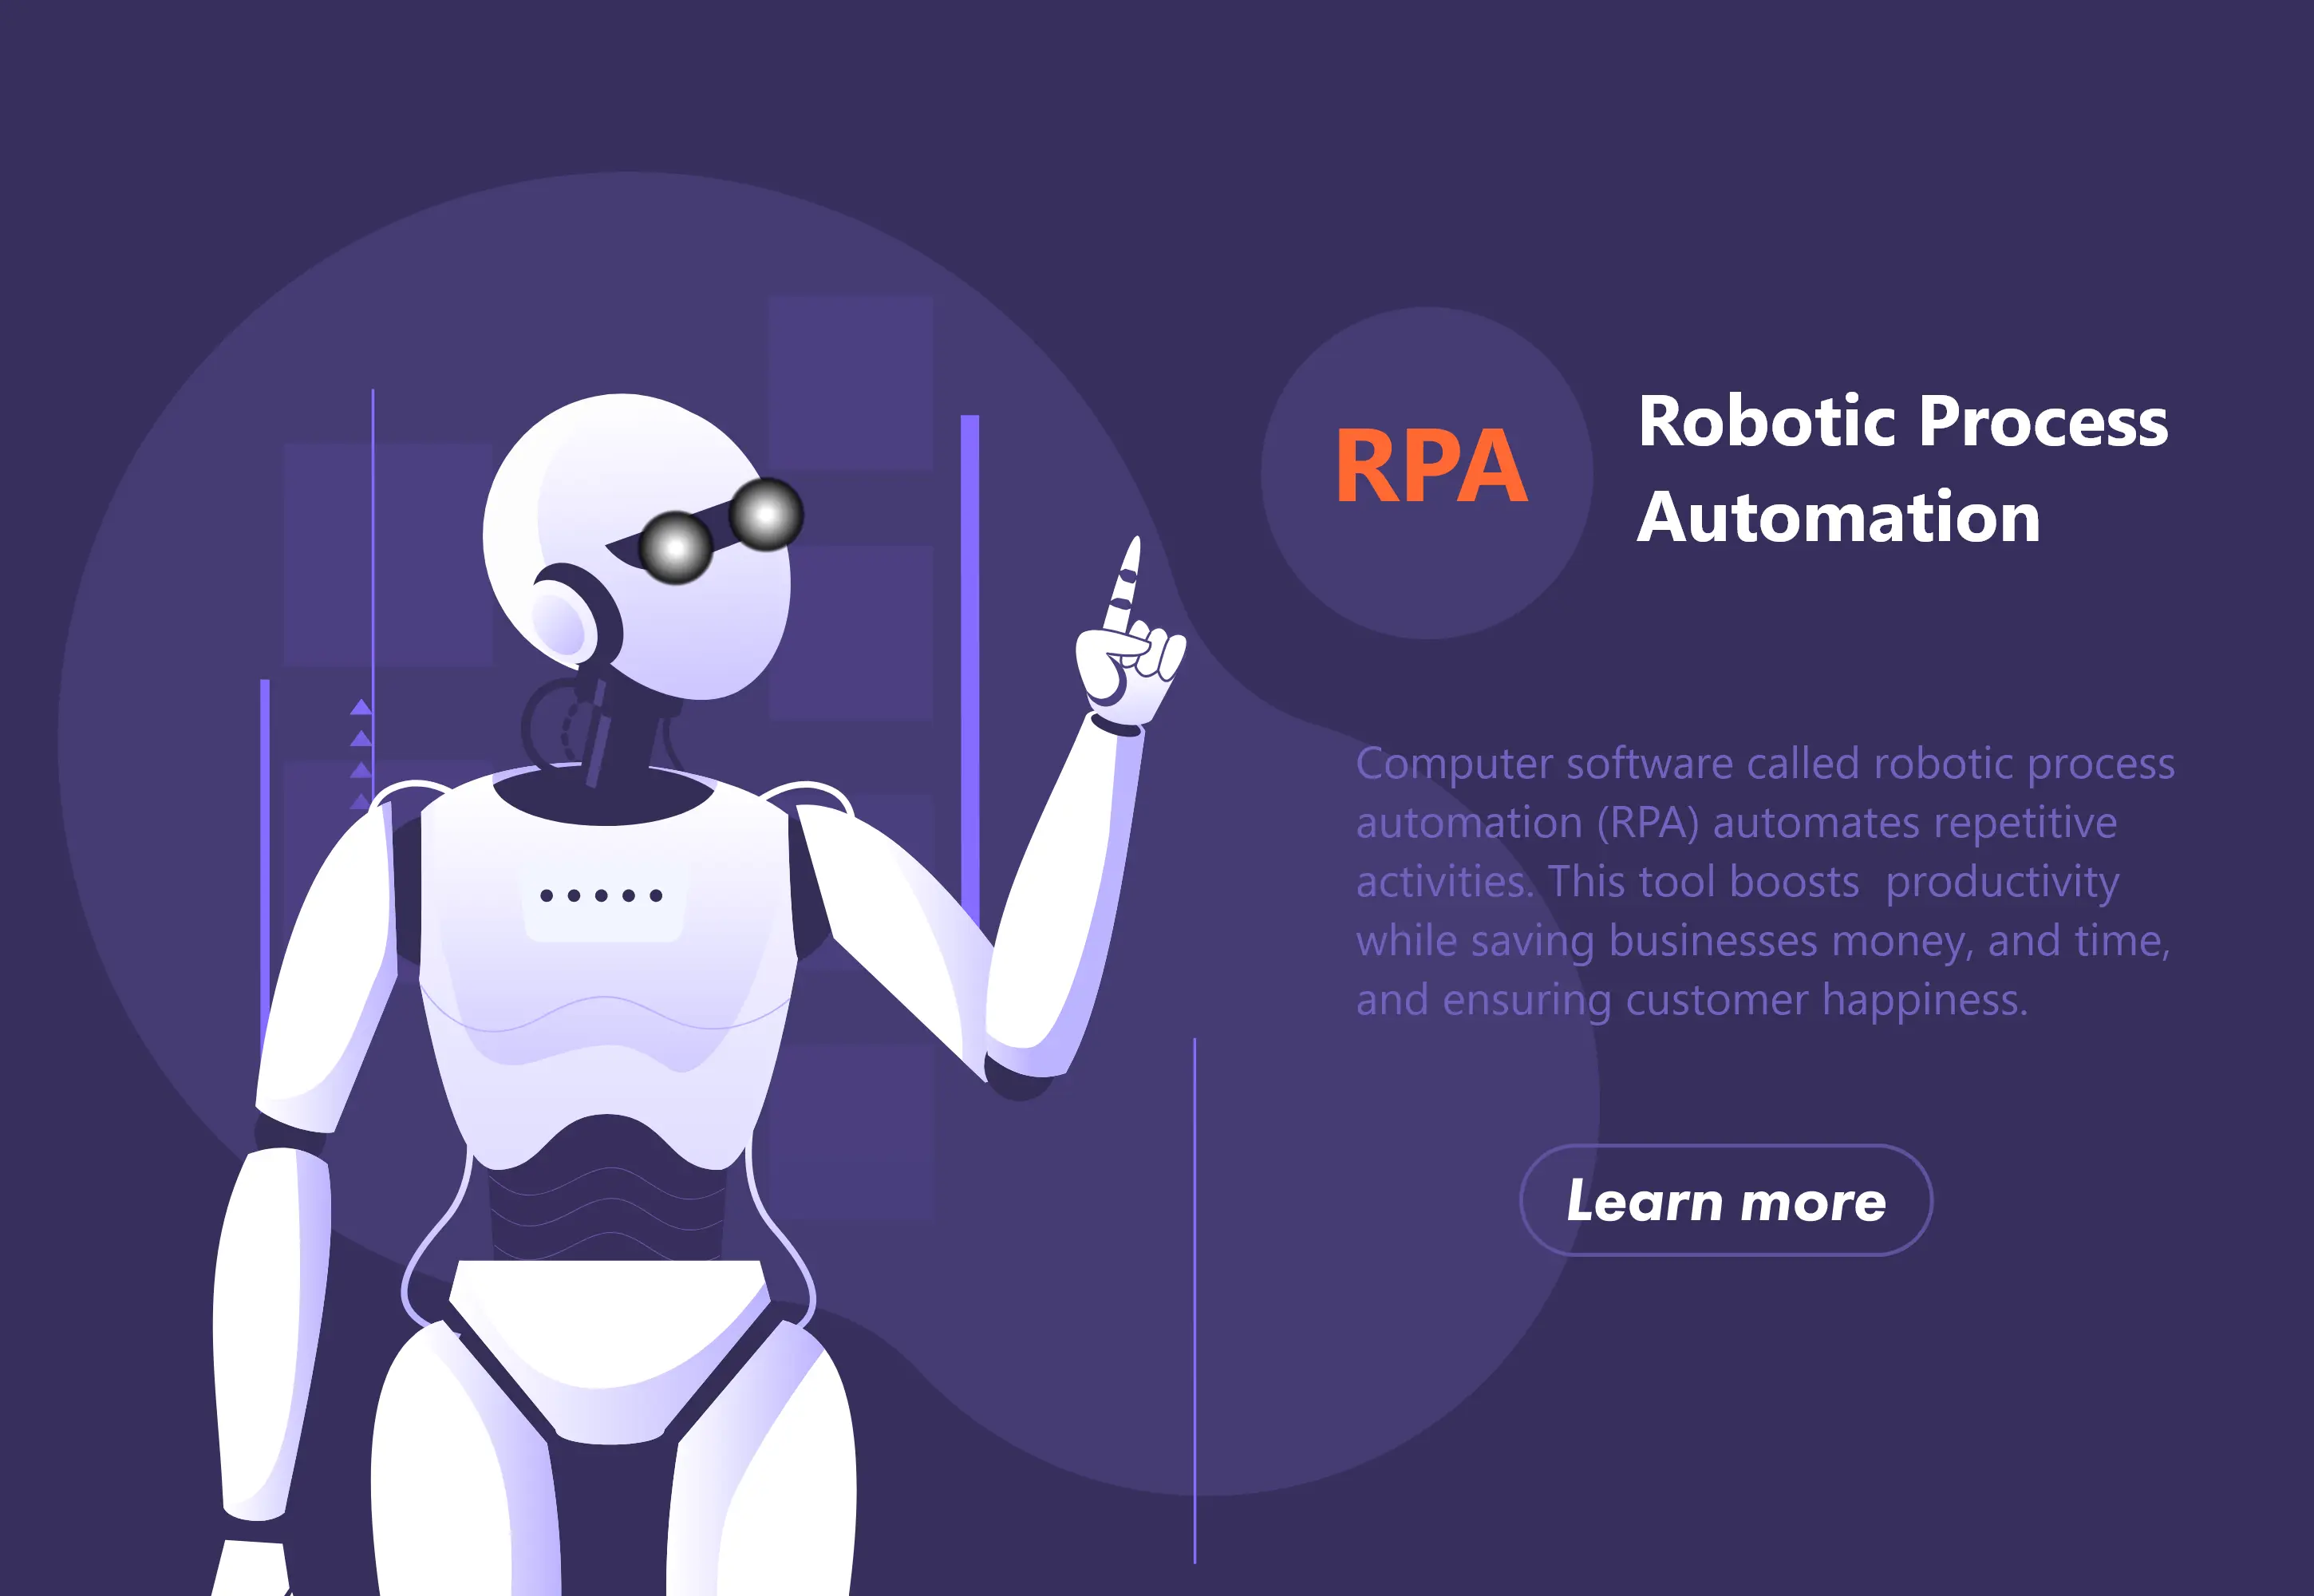 History of Robotic Process Automation (RPA)